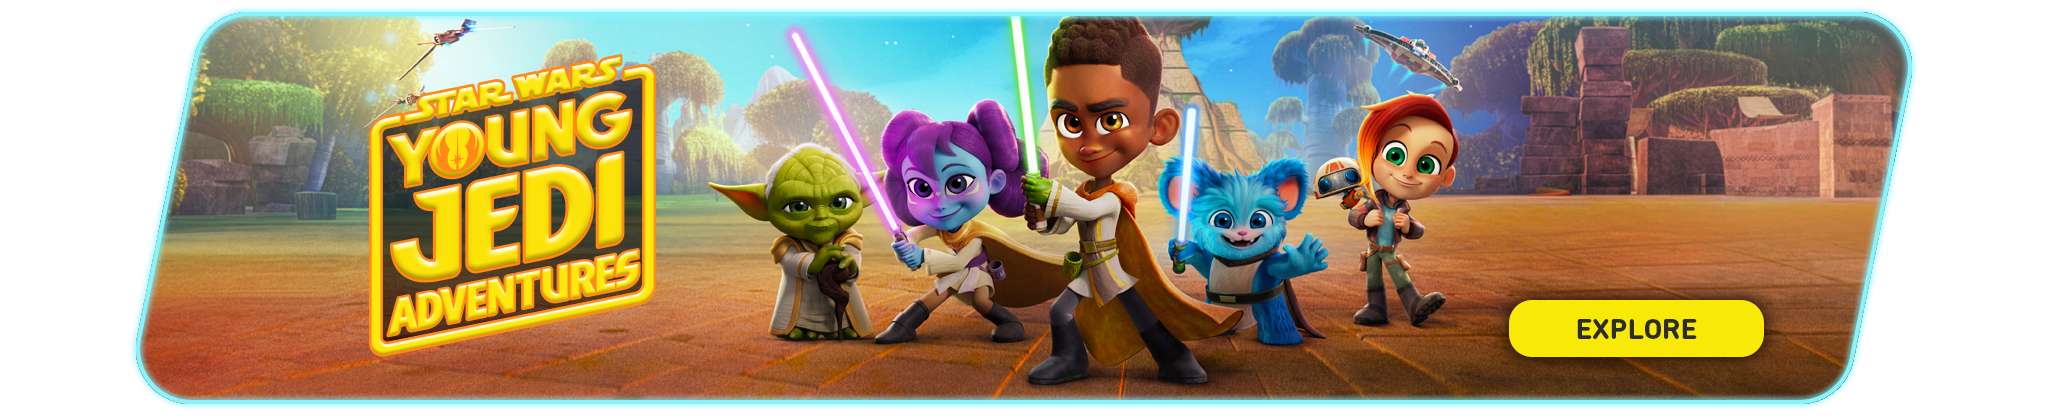 Young Jedi Adventures key art and logo